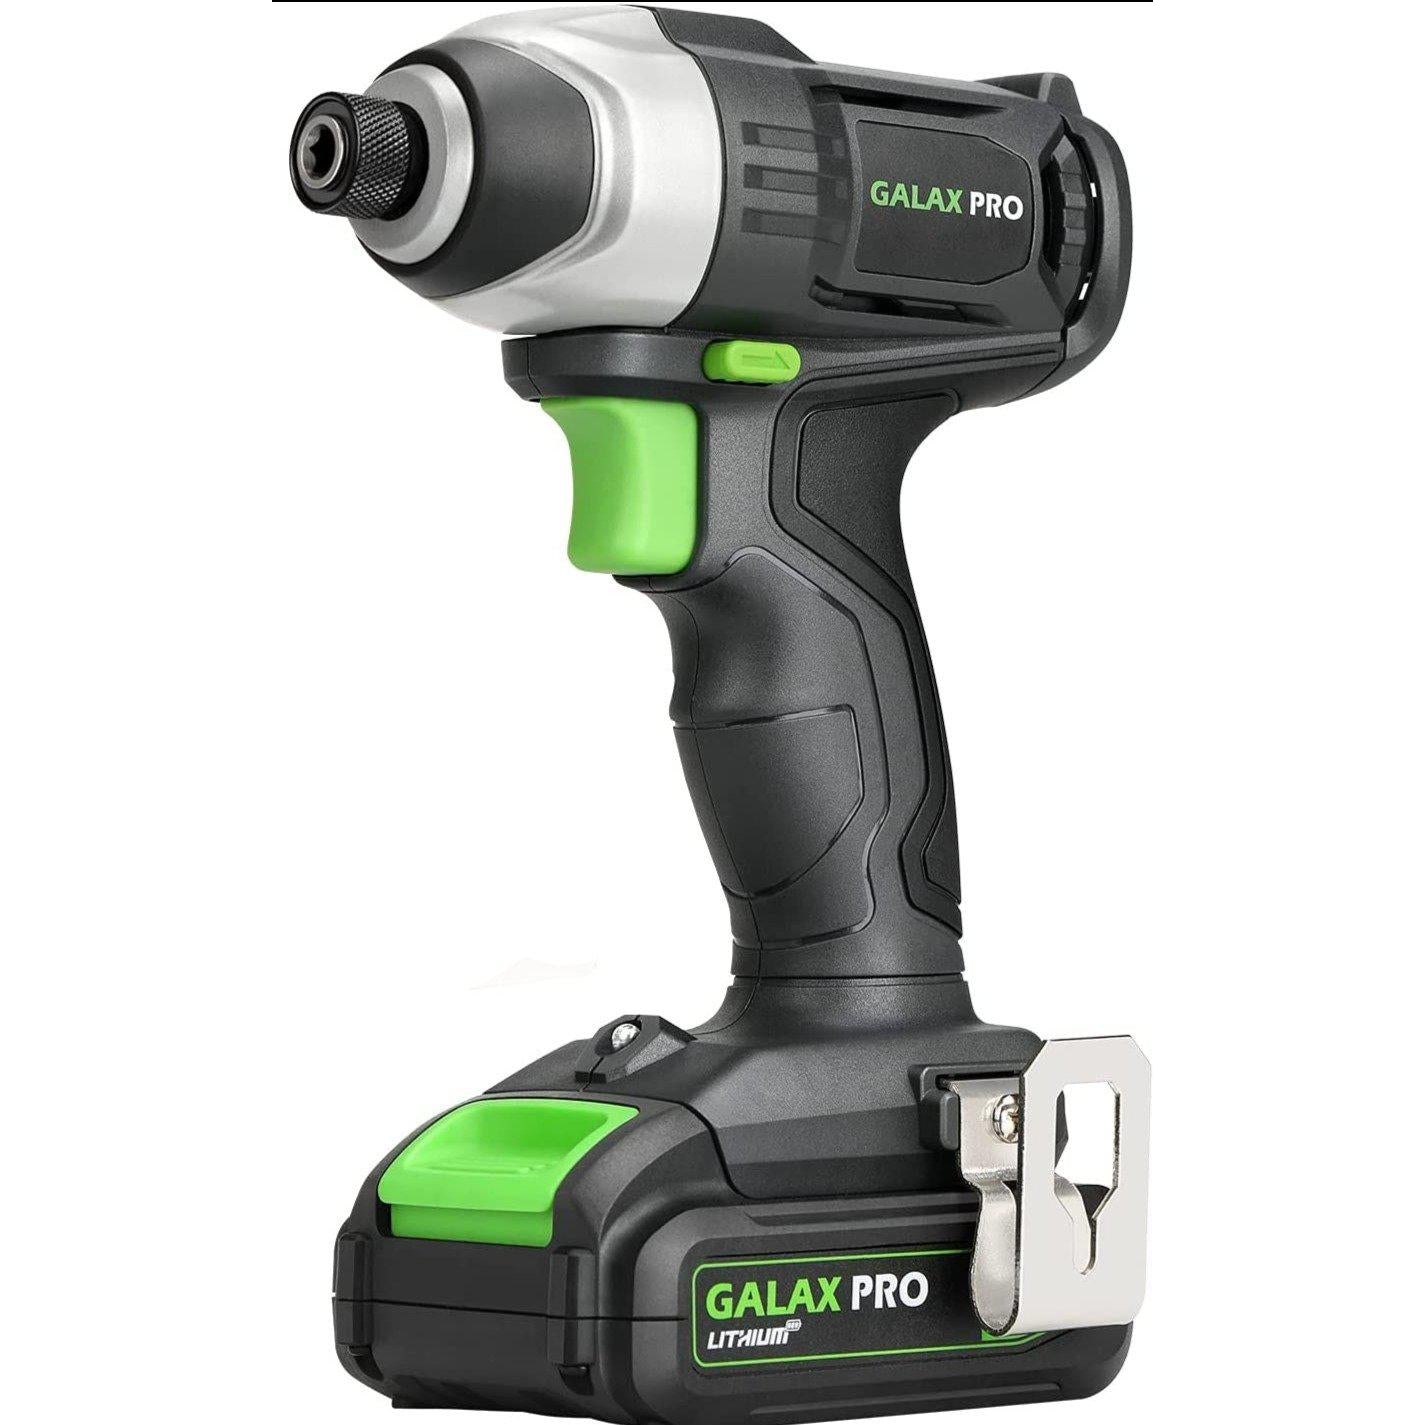 Galax Pro 95307 20V Lithium Ion 1/4" Hex Cordless Impact Driver, Variable Speed (0-2800RPM)